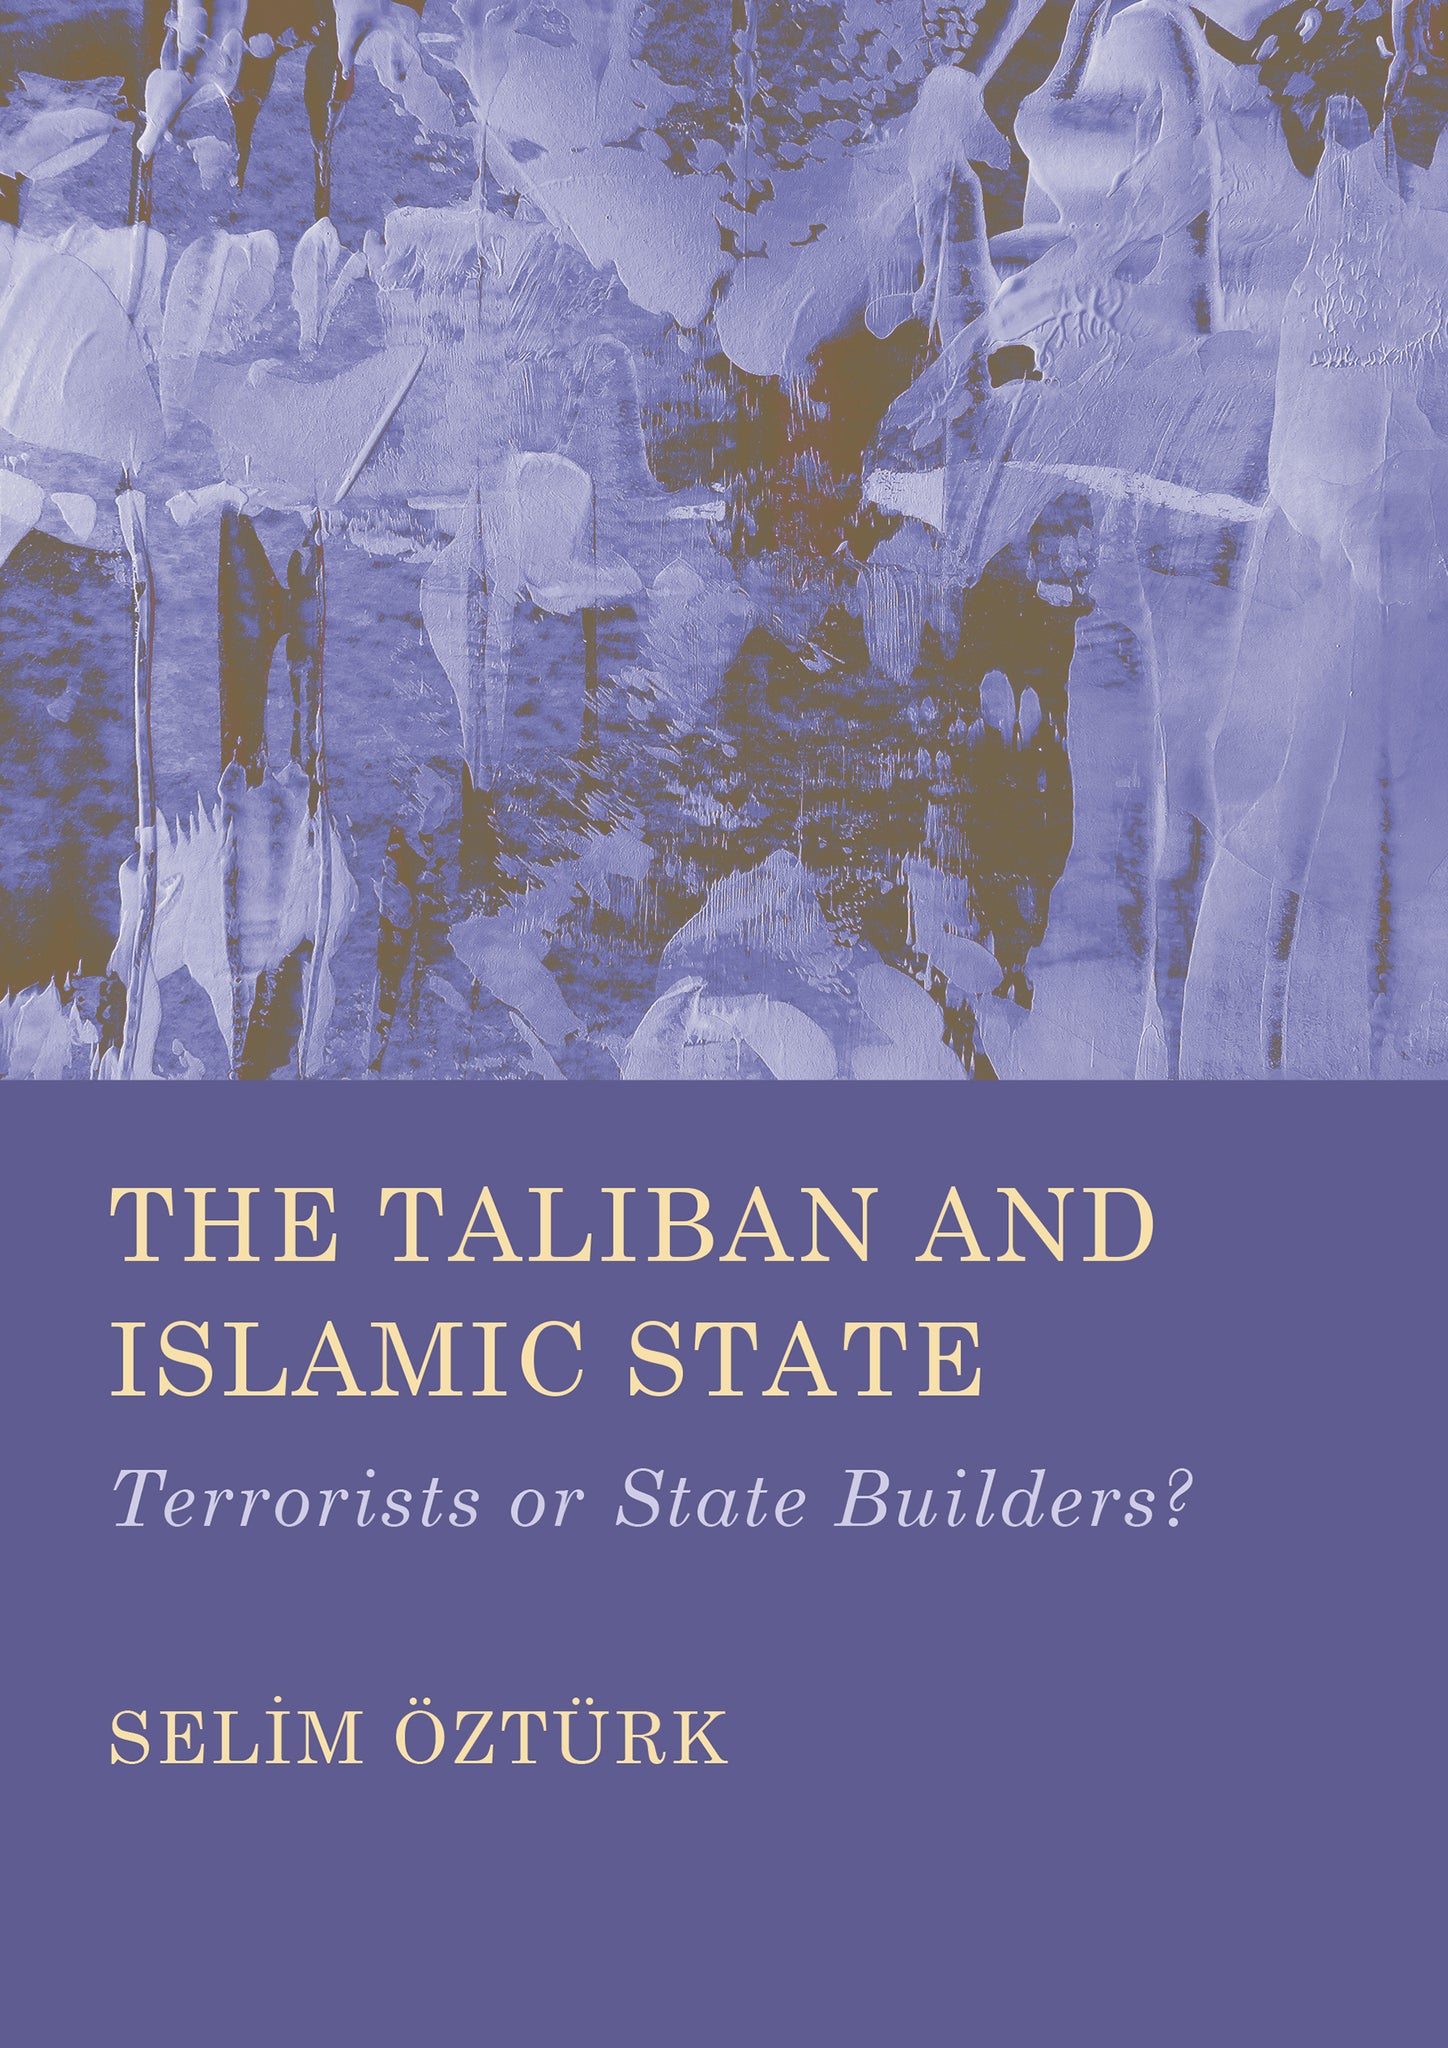 The Taliban and Islamic State: Terrorists or State Builders?